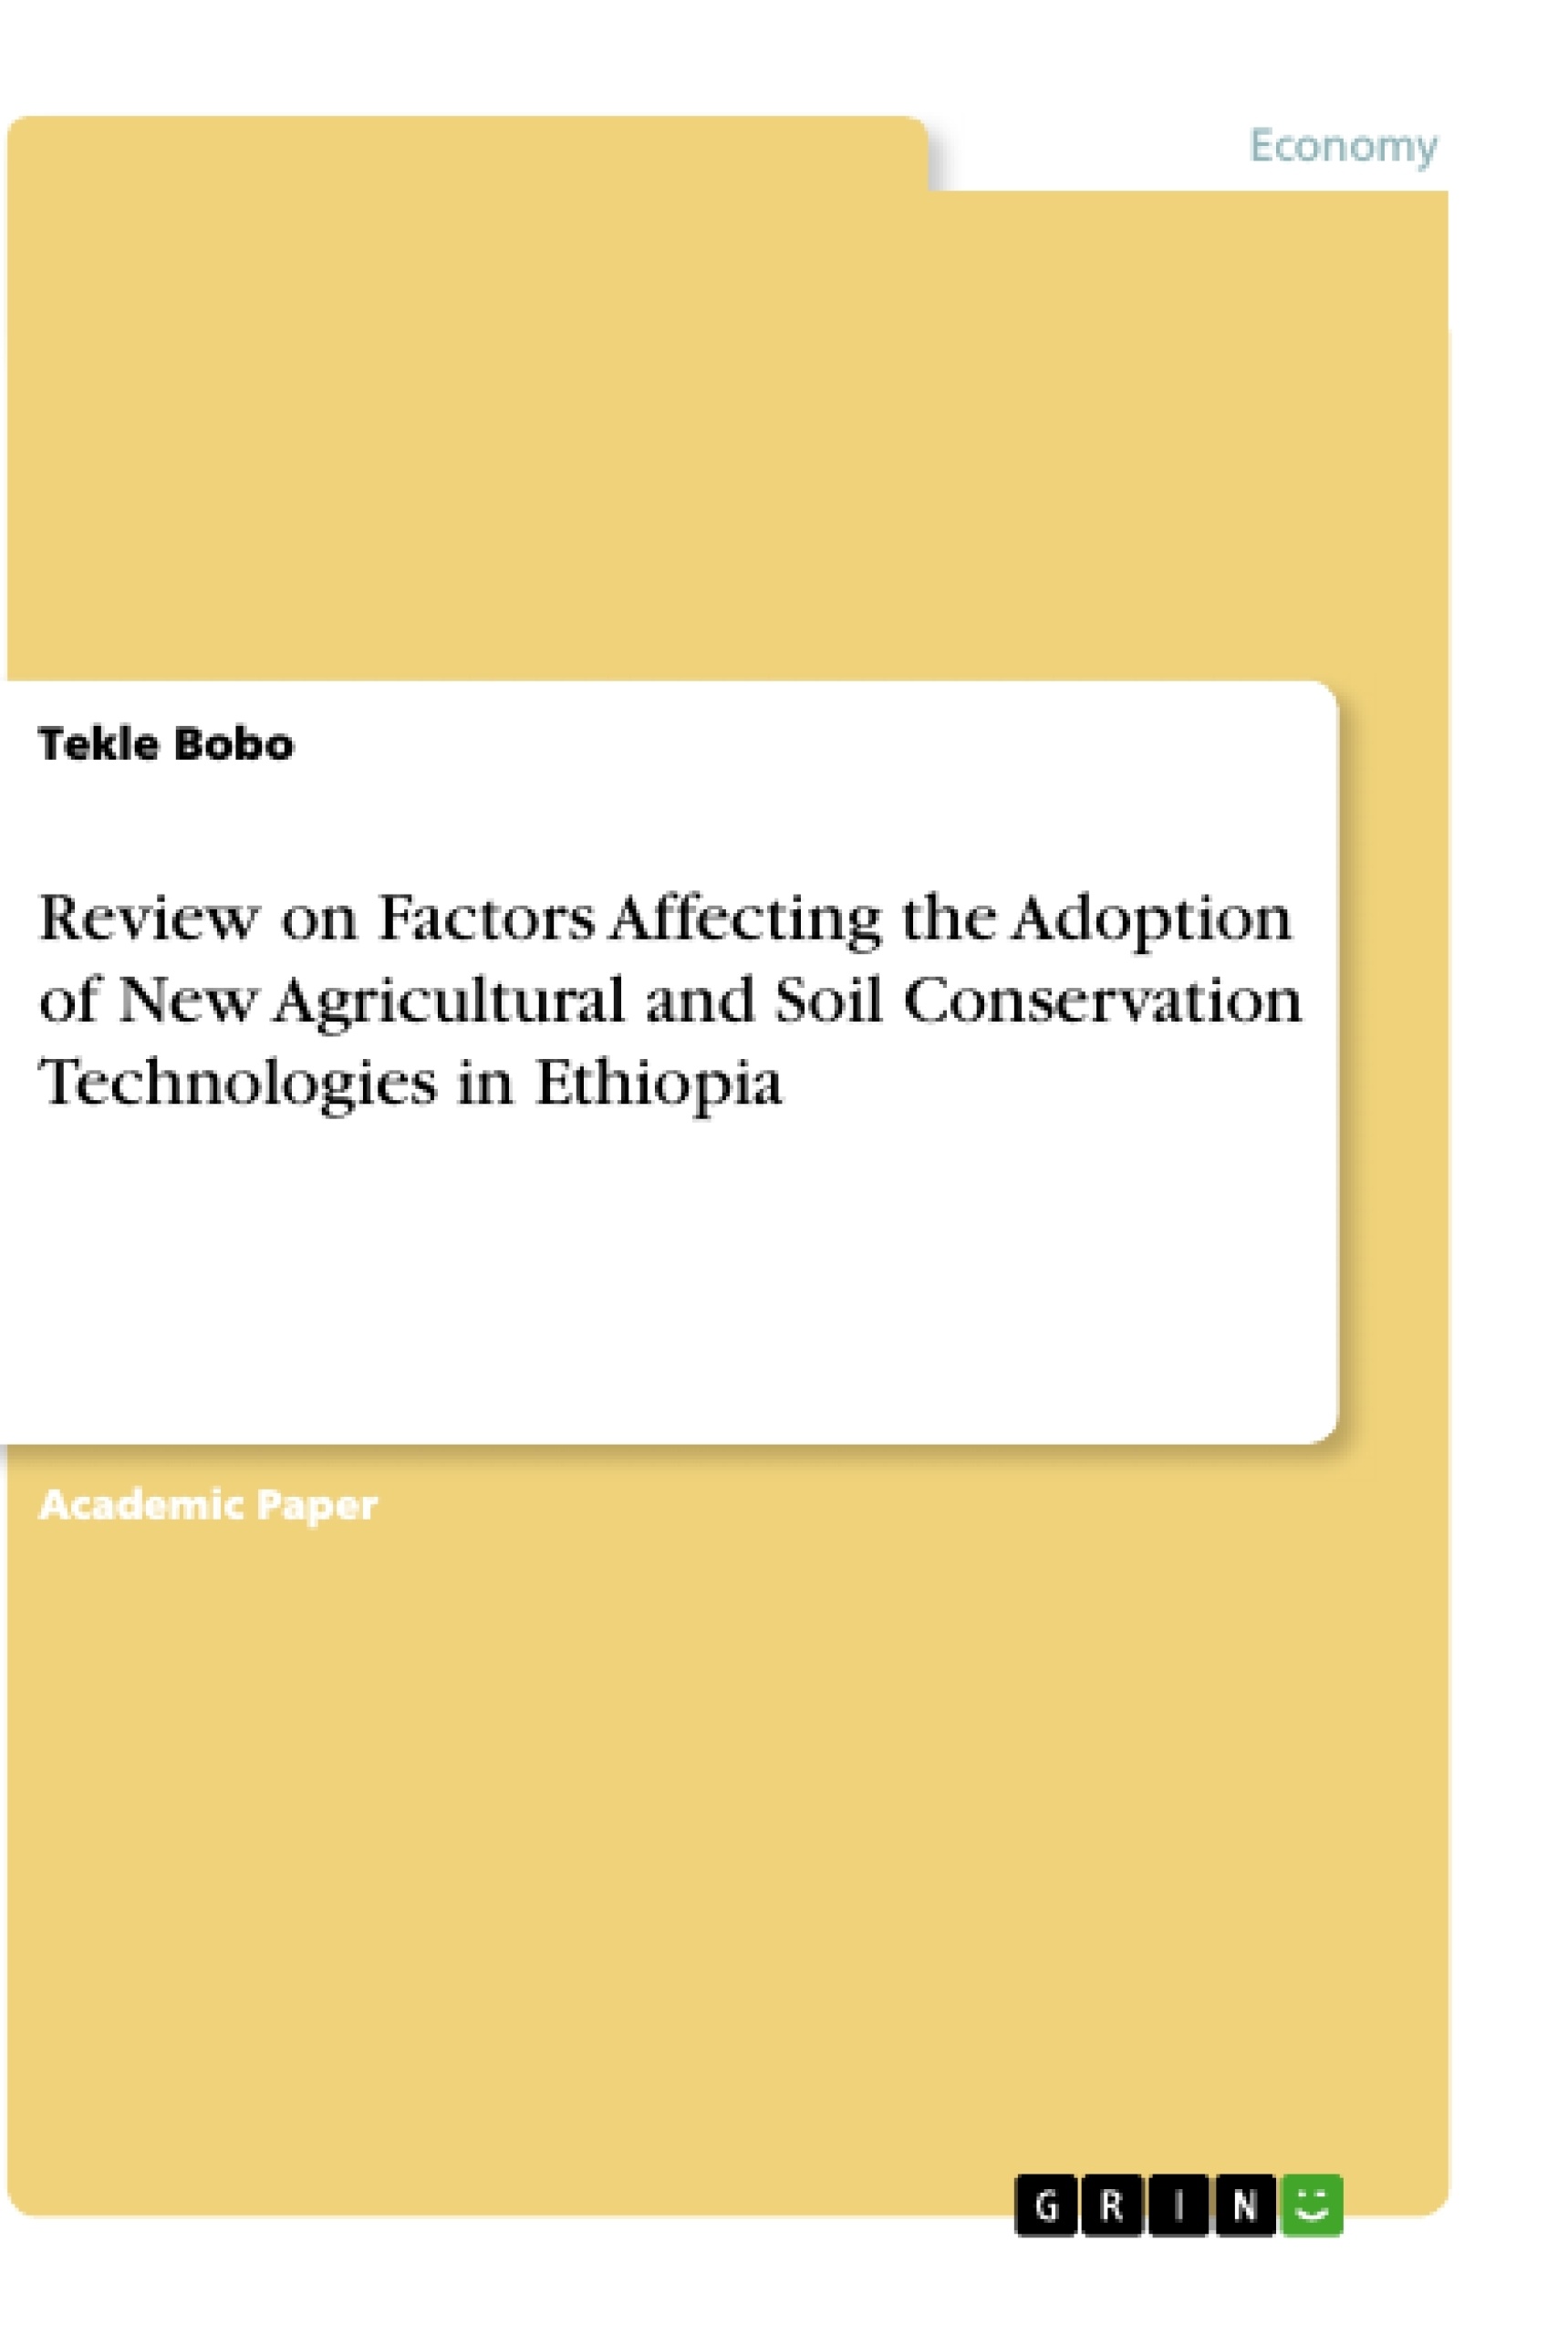 Title: Review on Factors Affecting the Adoption of New Agricultural and Soil Conservation Technologies in Ethiopia